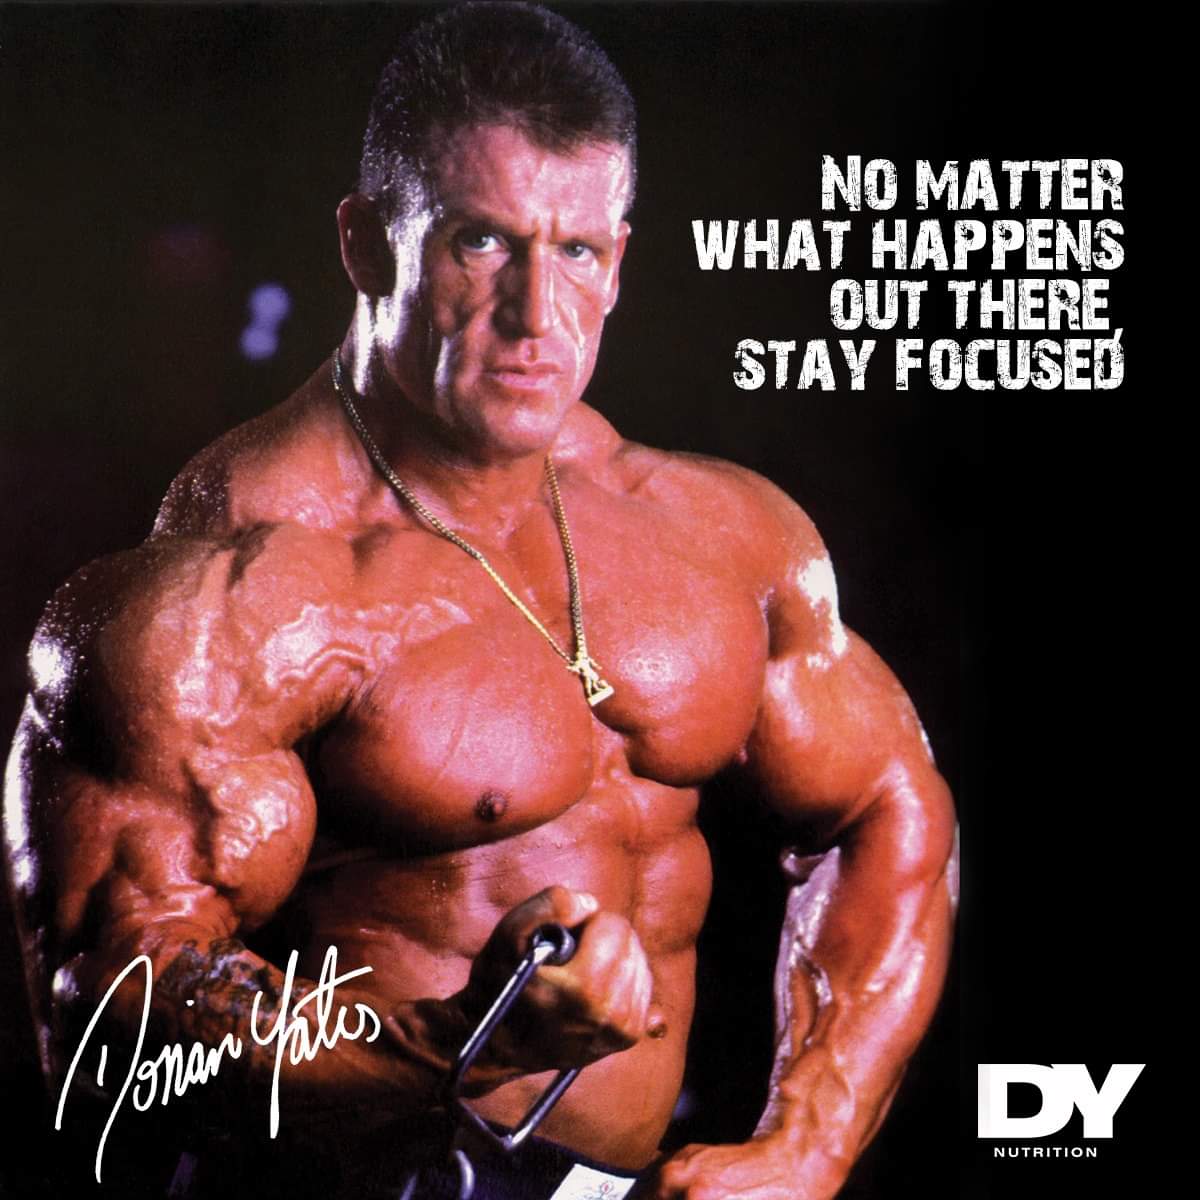 dorian yates motivation "no matter what happens out there stay focused"